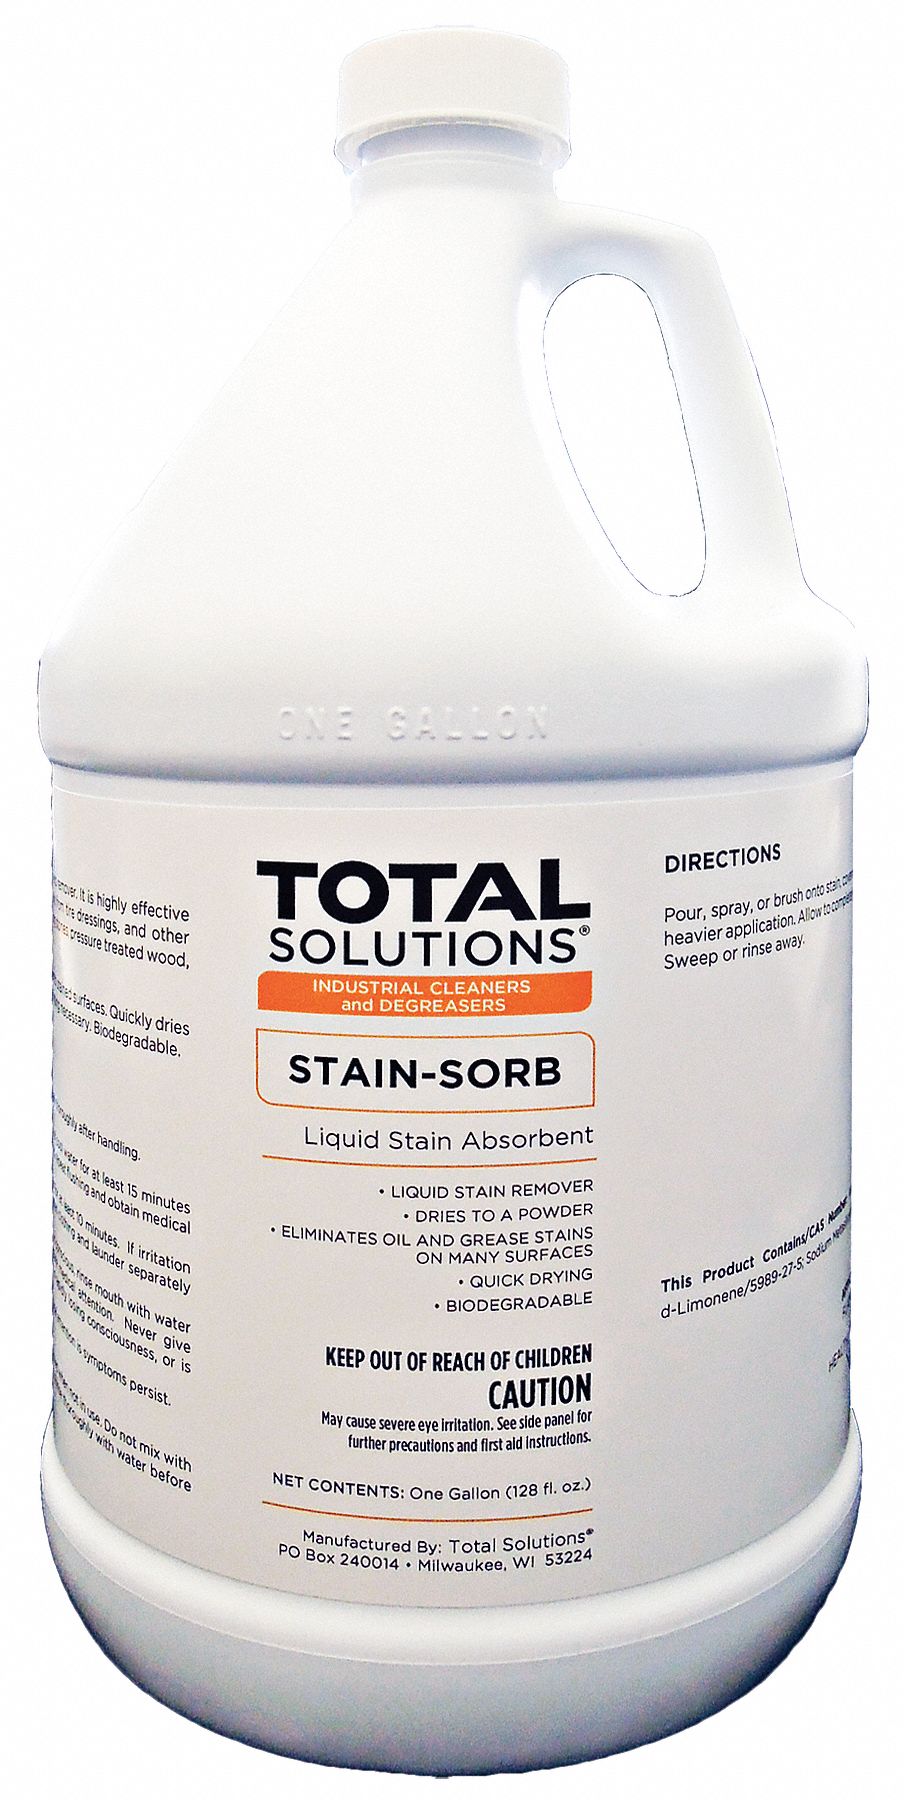 Stain Absorbent: Jug, 1 gal Container Size, Ready to Use, Liquid